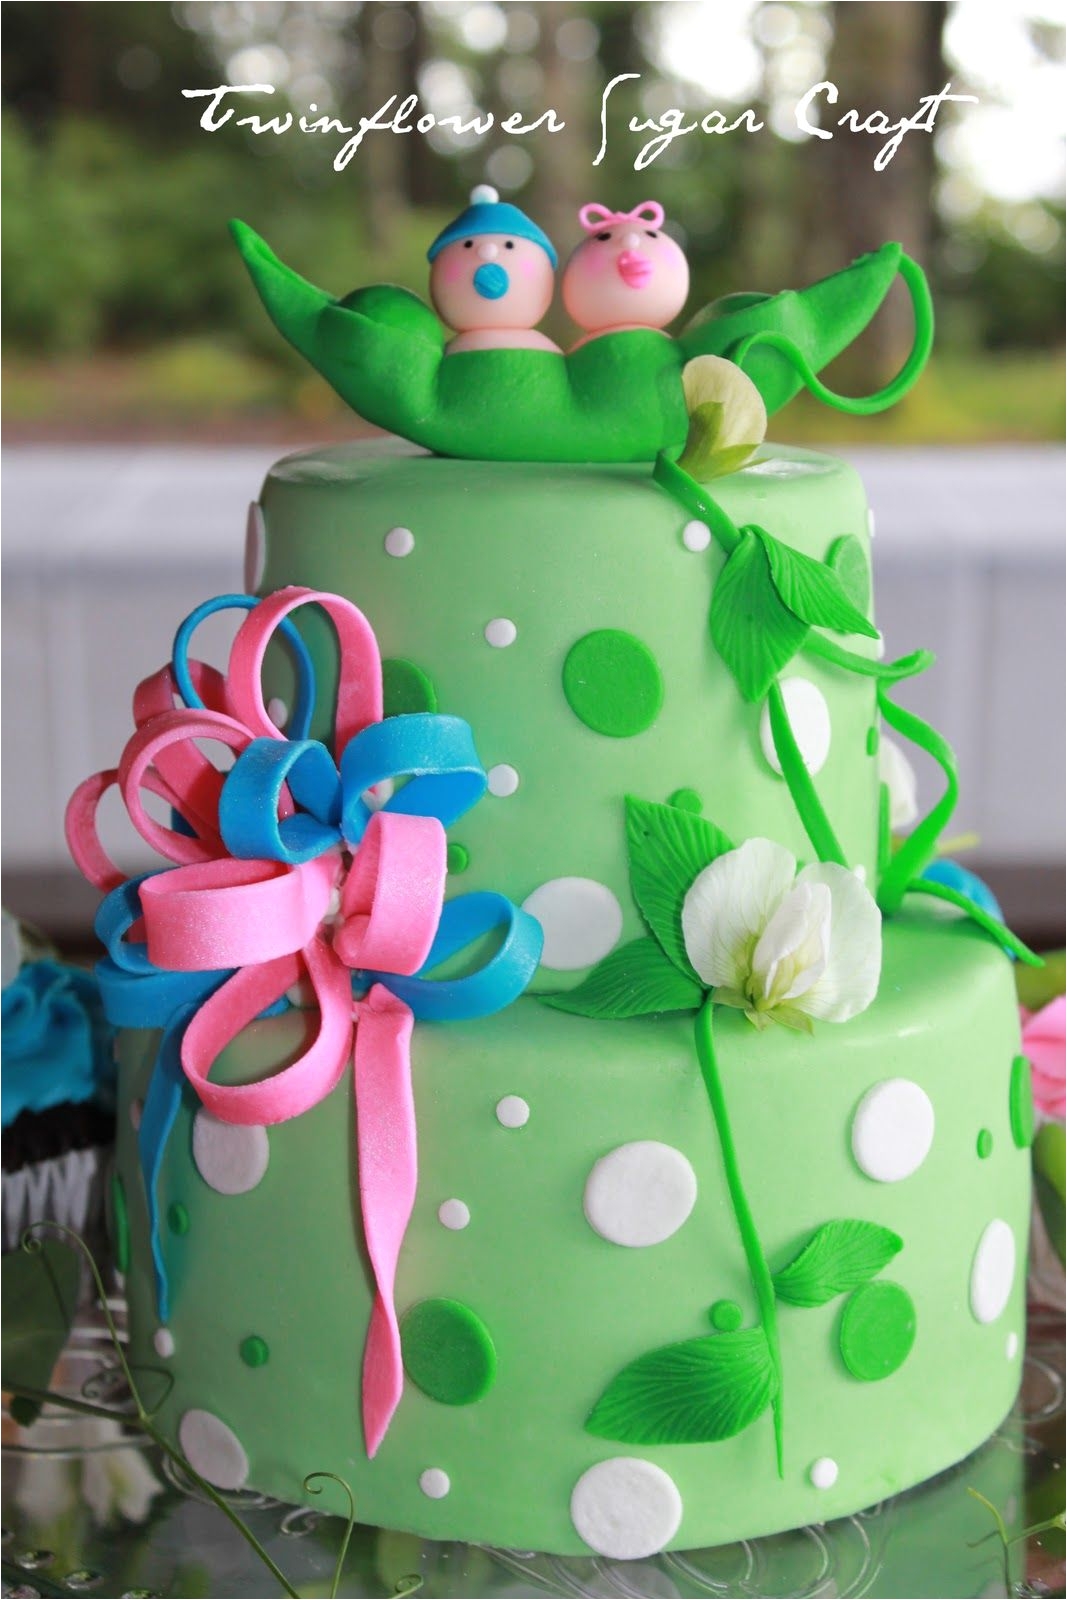 baby shower cake for twins two peas in a pod picture cakepins com